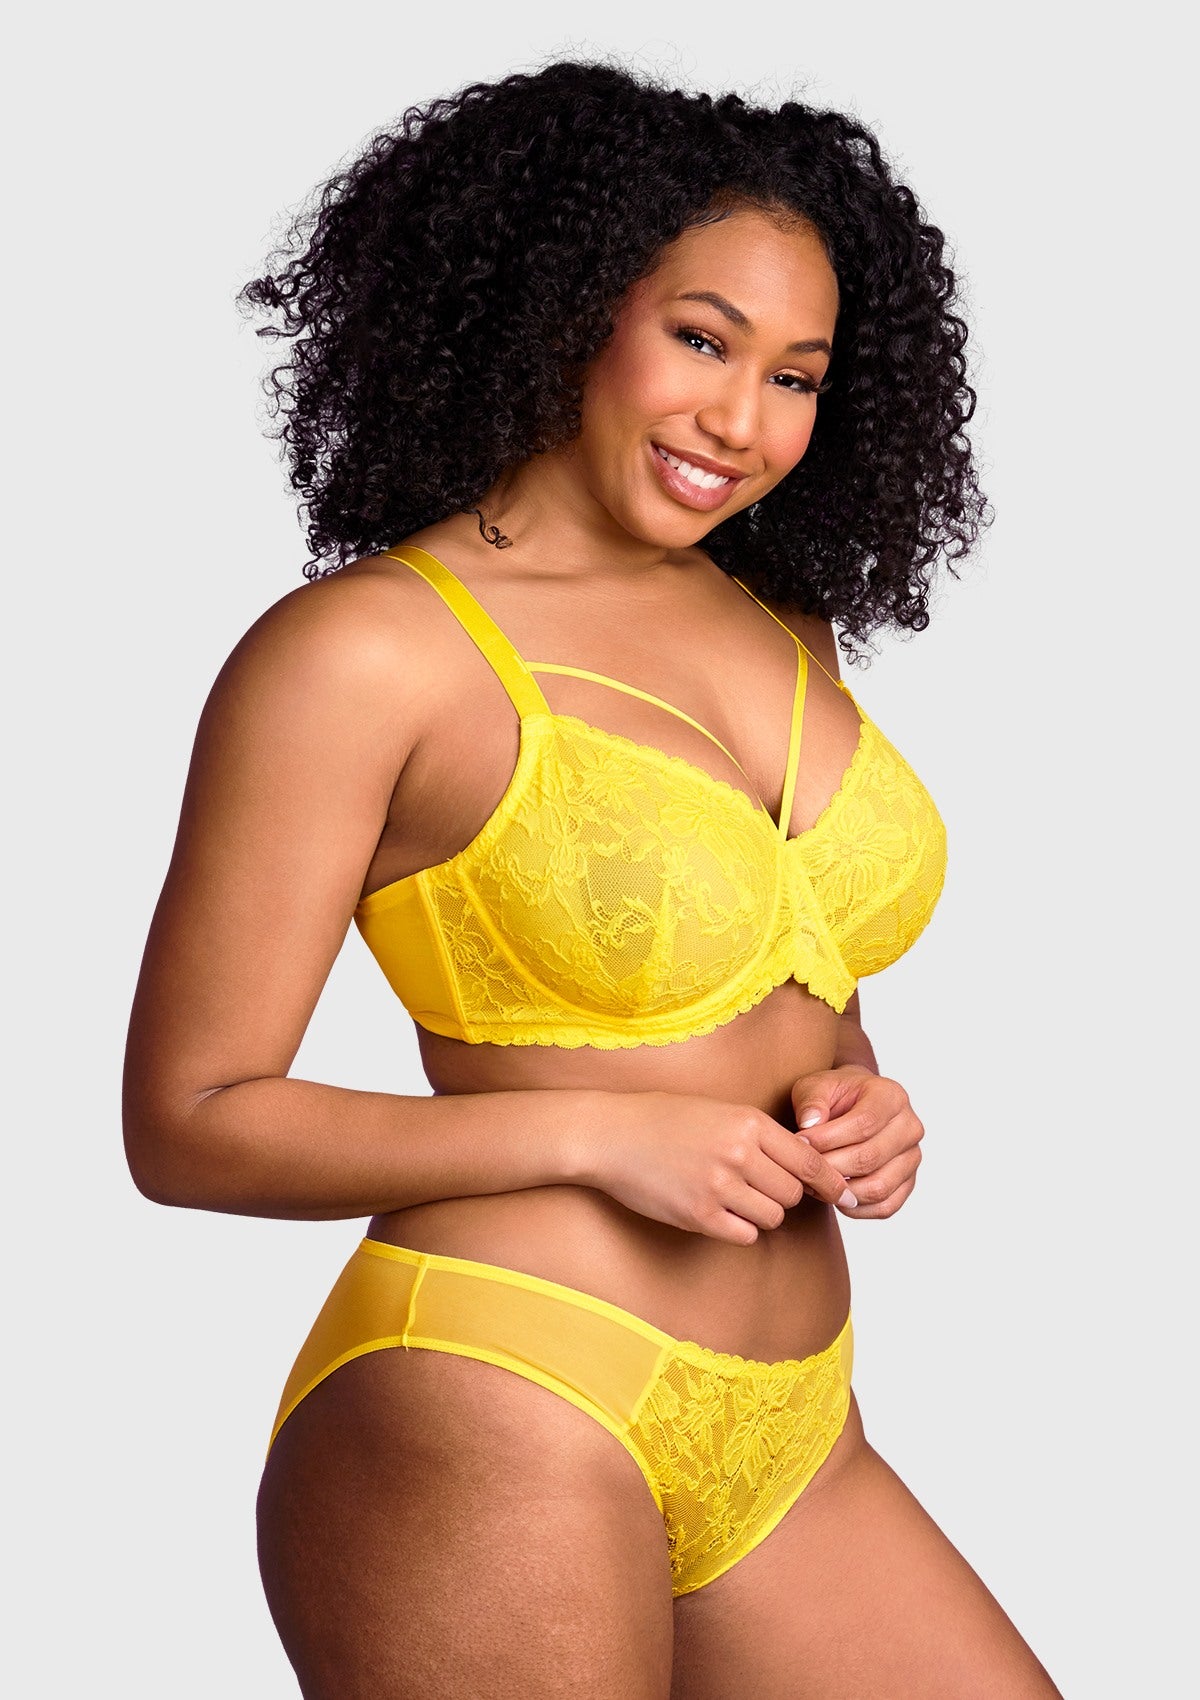 HSIA Unlined Lace Mesh Minimizer Bra For Large Breasts, Full Coverage - Bright Yellow / 34 / DD/E